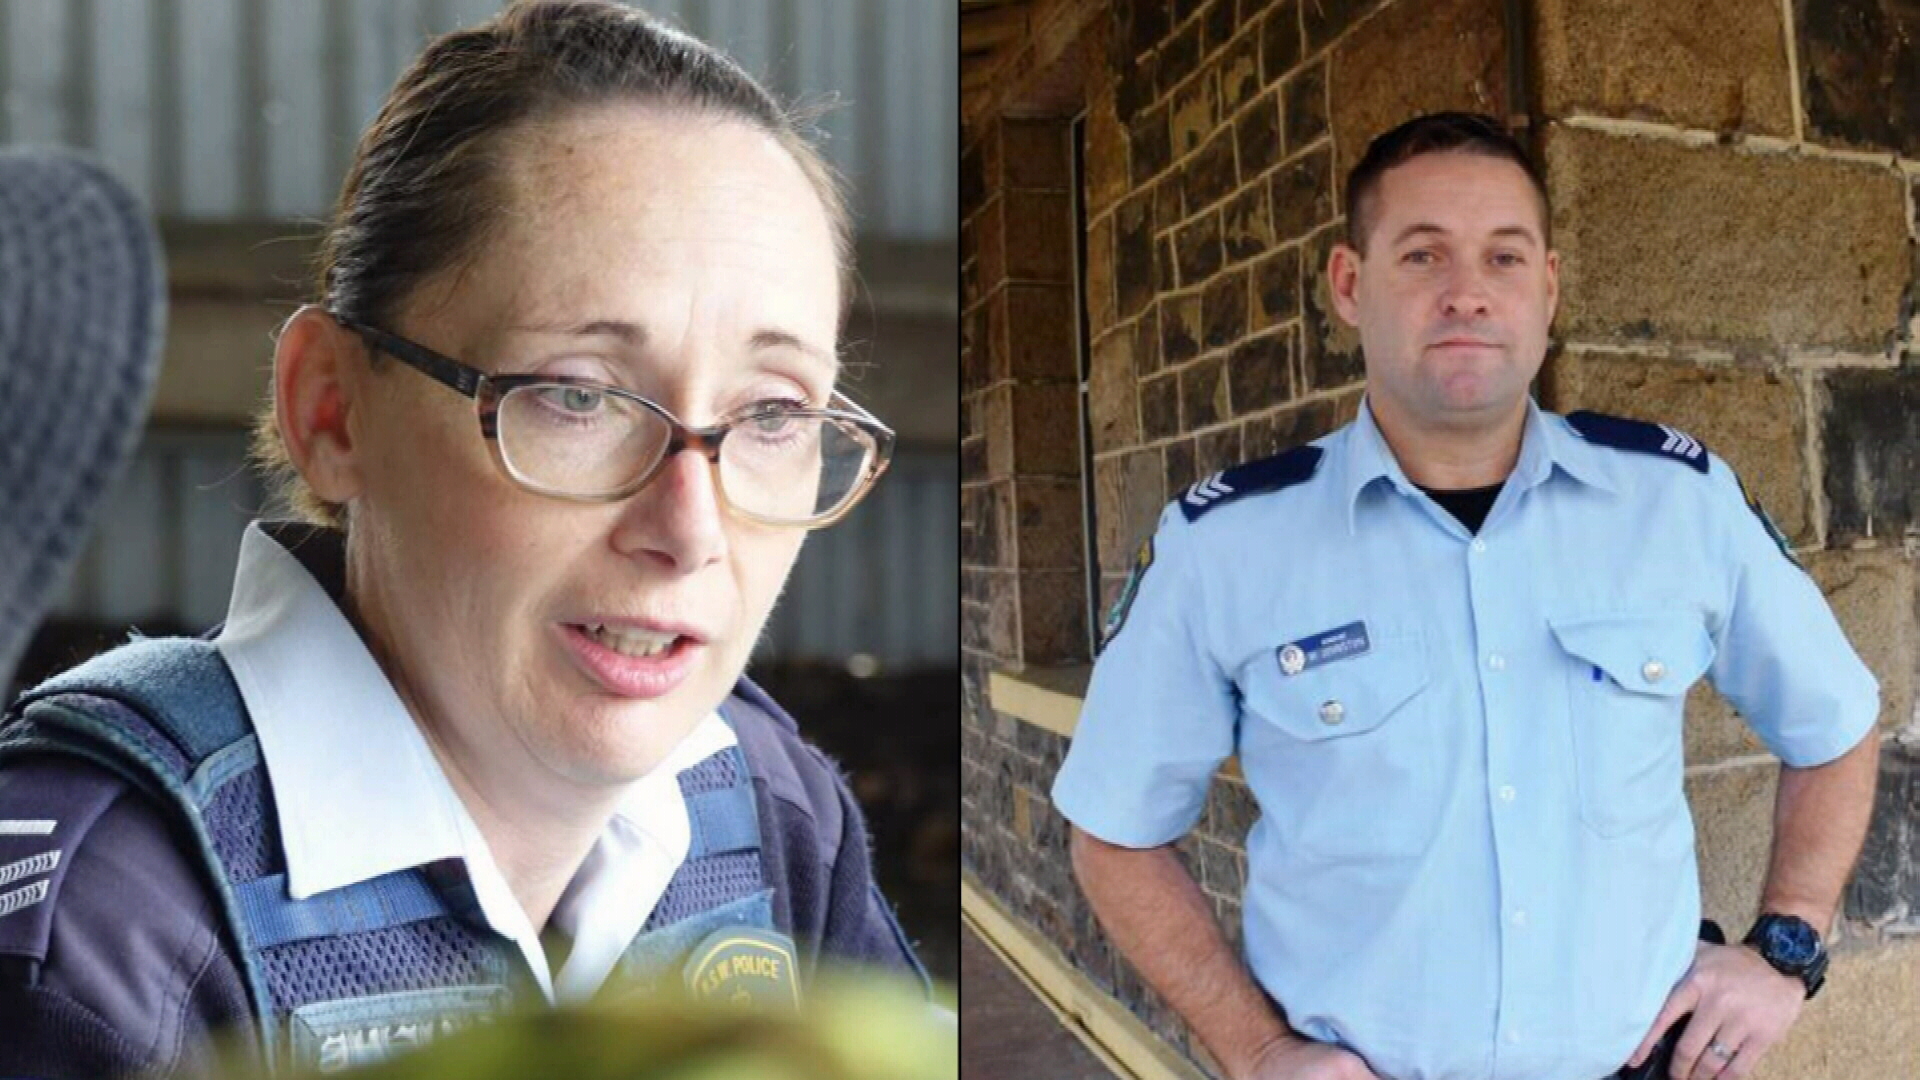 Update on two police officers shot in NSW